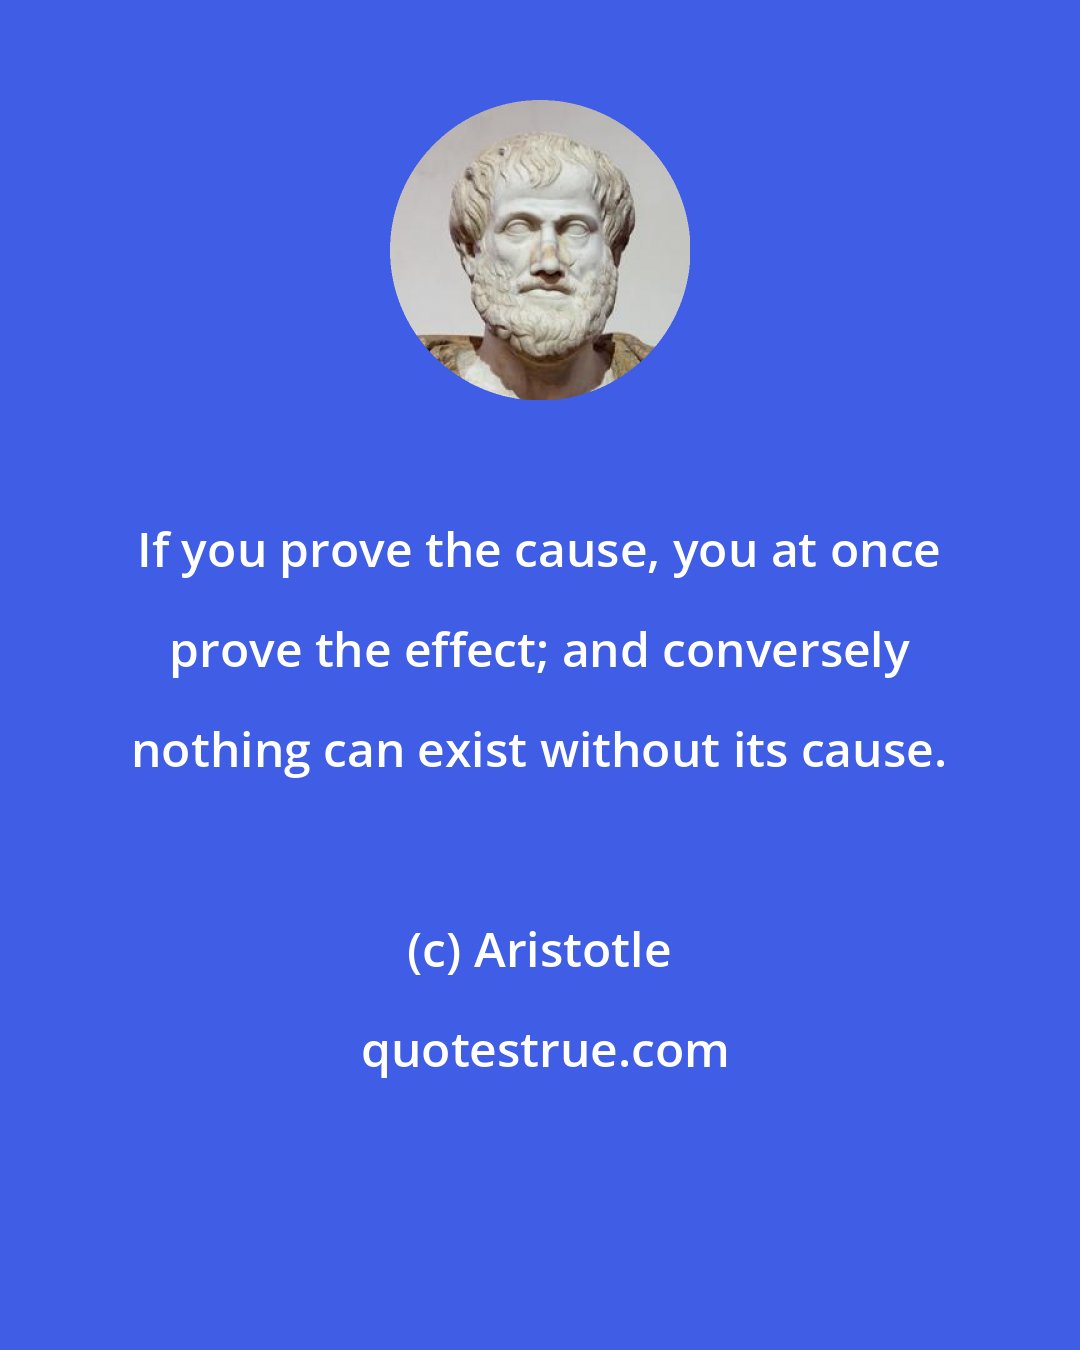 Aristotle: If you prove the cause, you at once prove the effect; and conversely nothing can exist without its cause.